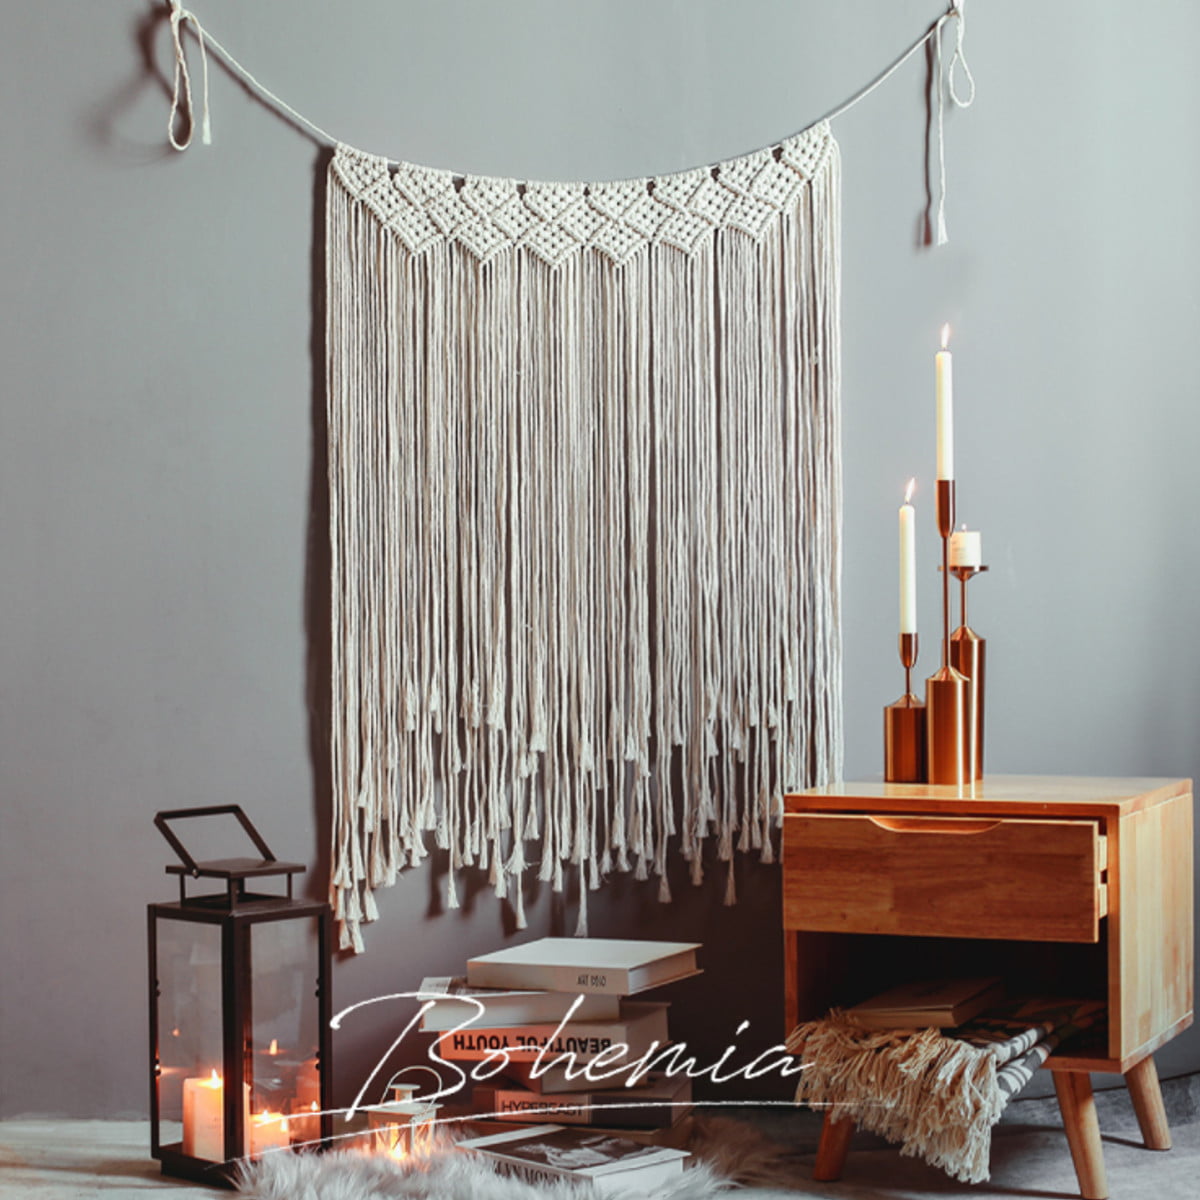 Bohemian Fringe Macrame Curtain for Wedding Living Room Bedroom Gallery Dorm Wall Decorations Macrame Wall Hanging Macrame Wall Tapestry Cream, 47L × 40W Woven Boho Wall Decor with Tassels 